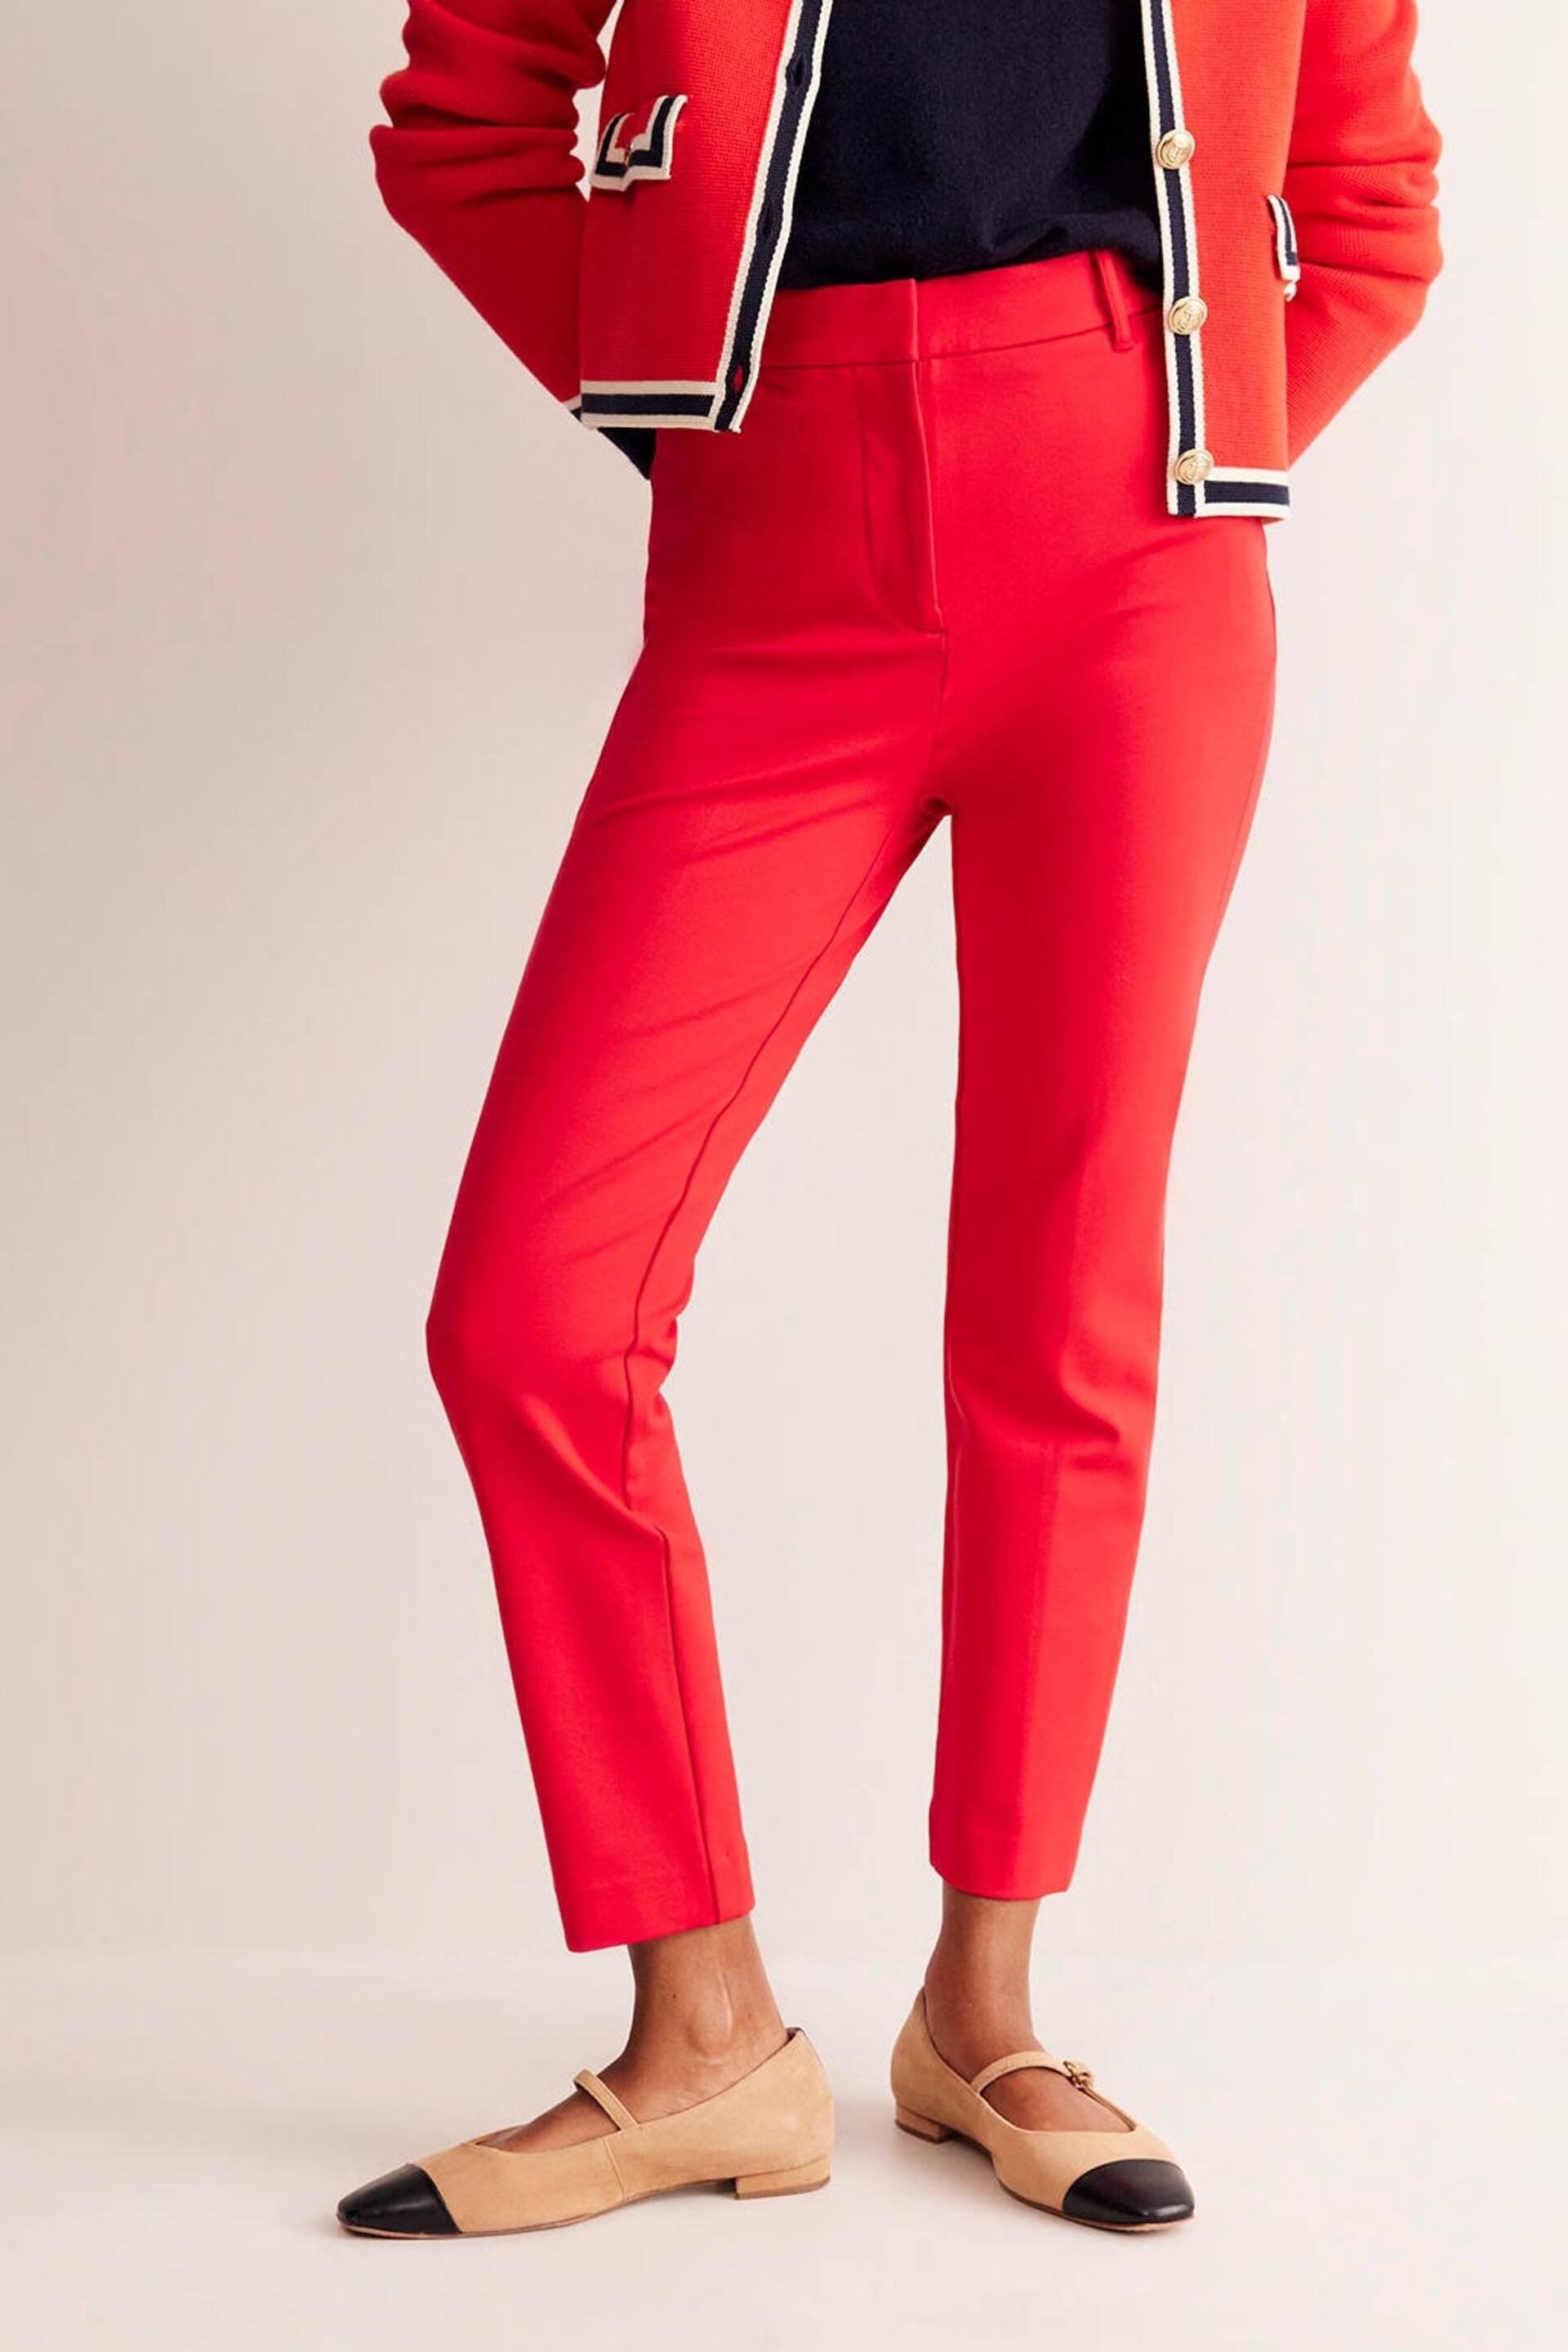 Boden Red Highgate Ponte Trousers - Image 1 of 5